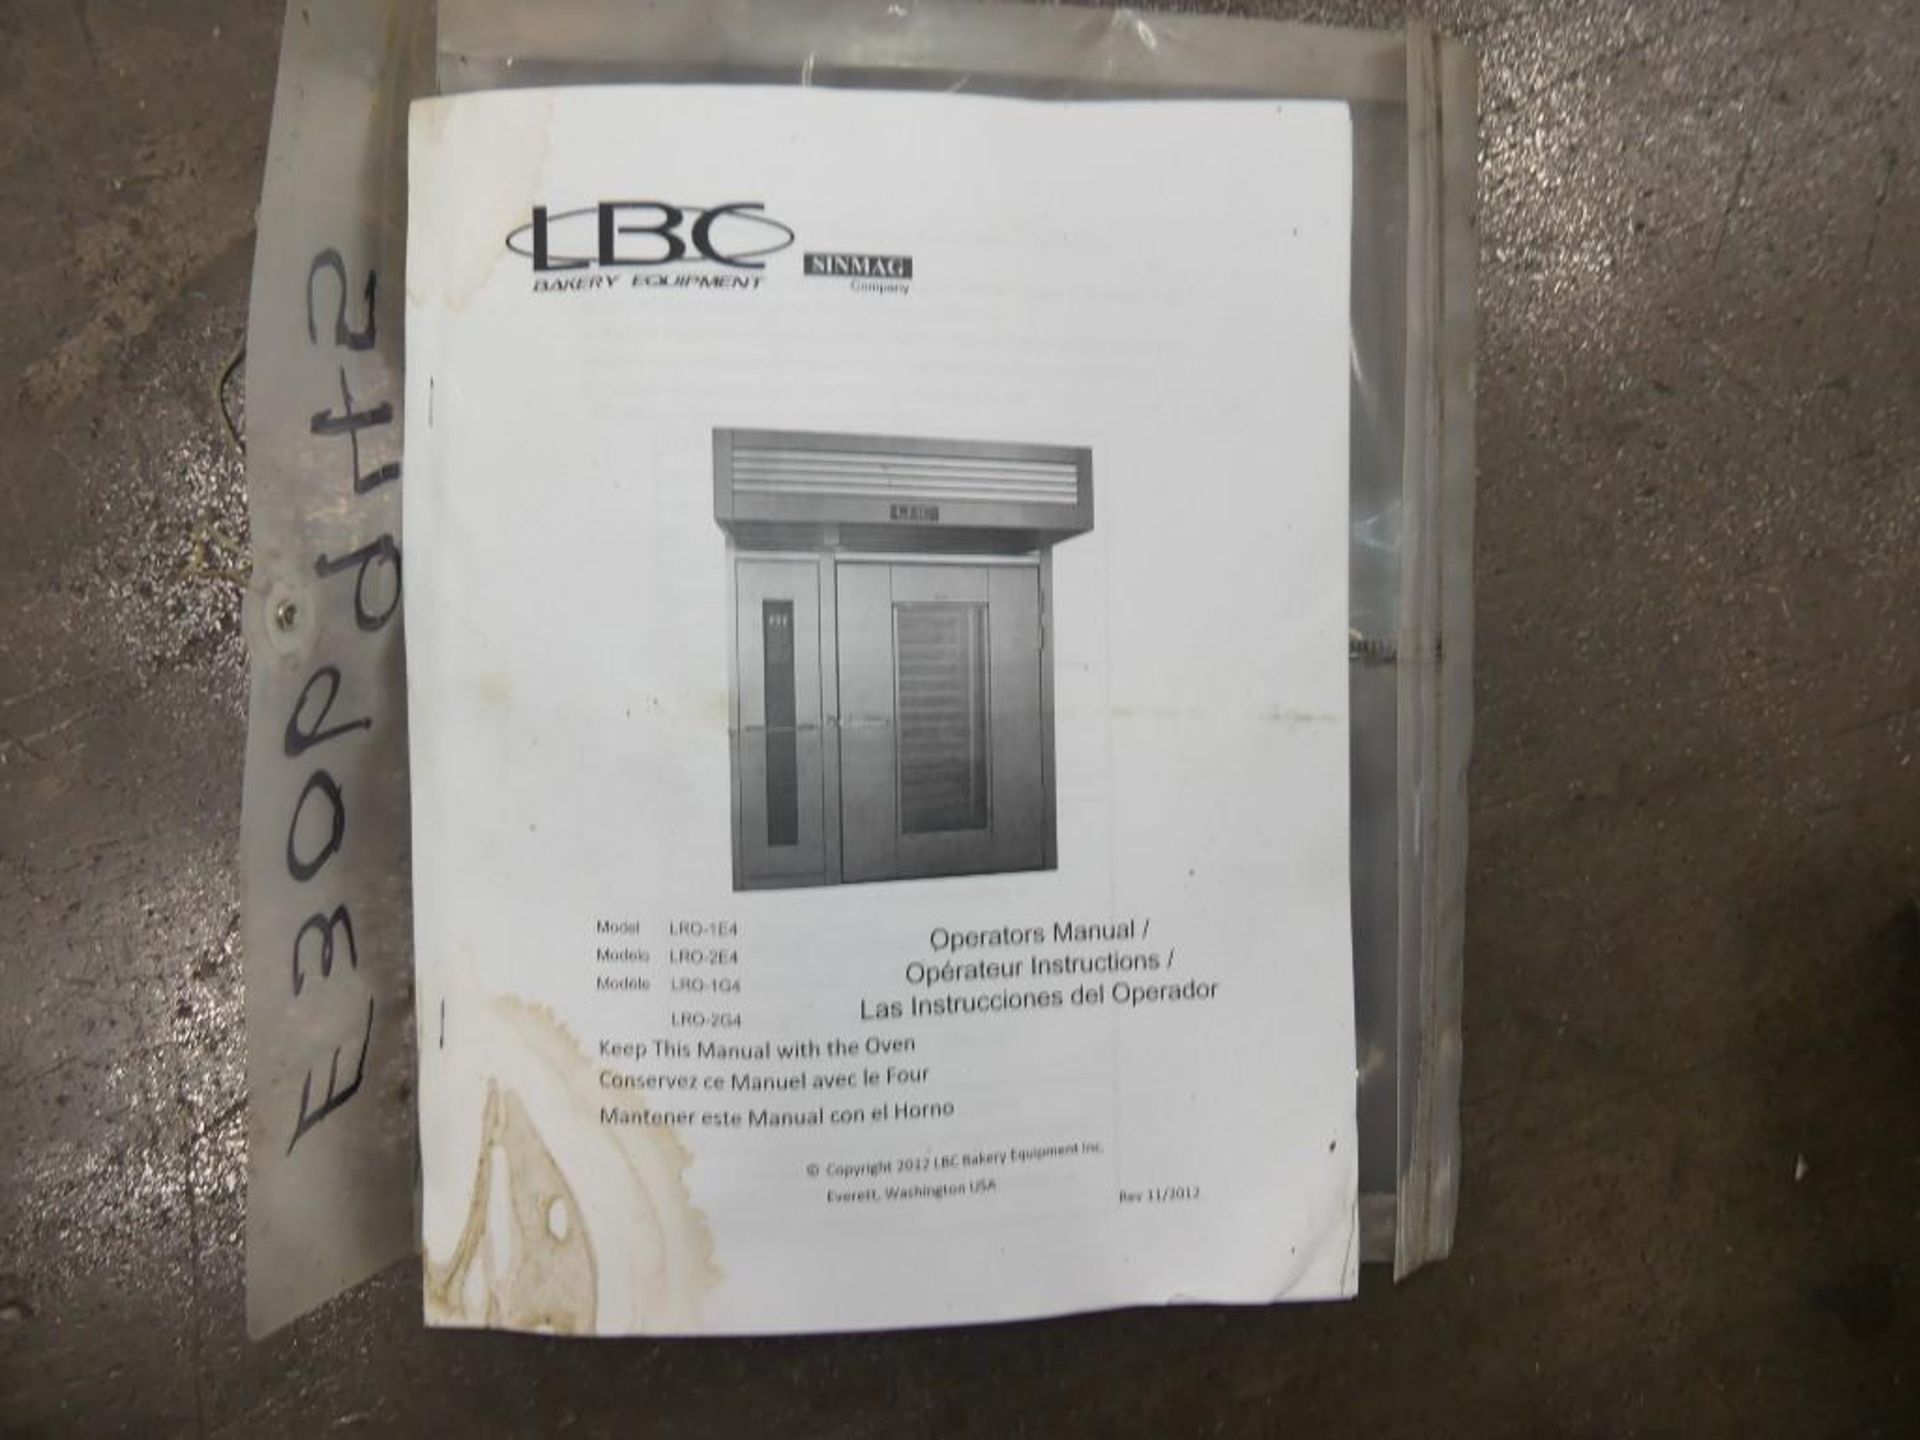 LBC LRO-2G Double Rack Stainless Steel Gas Oven - Image 32 of 36